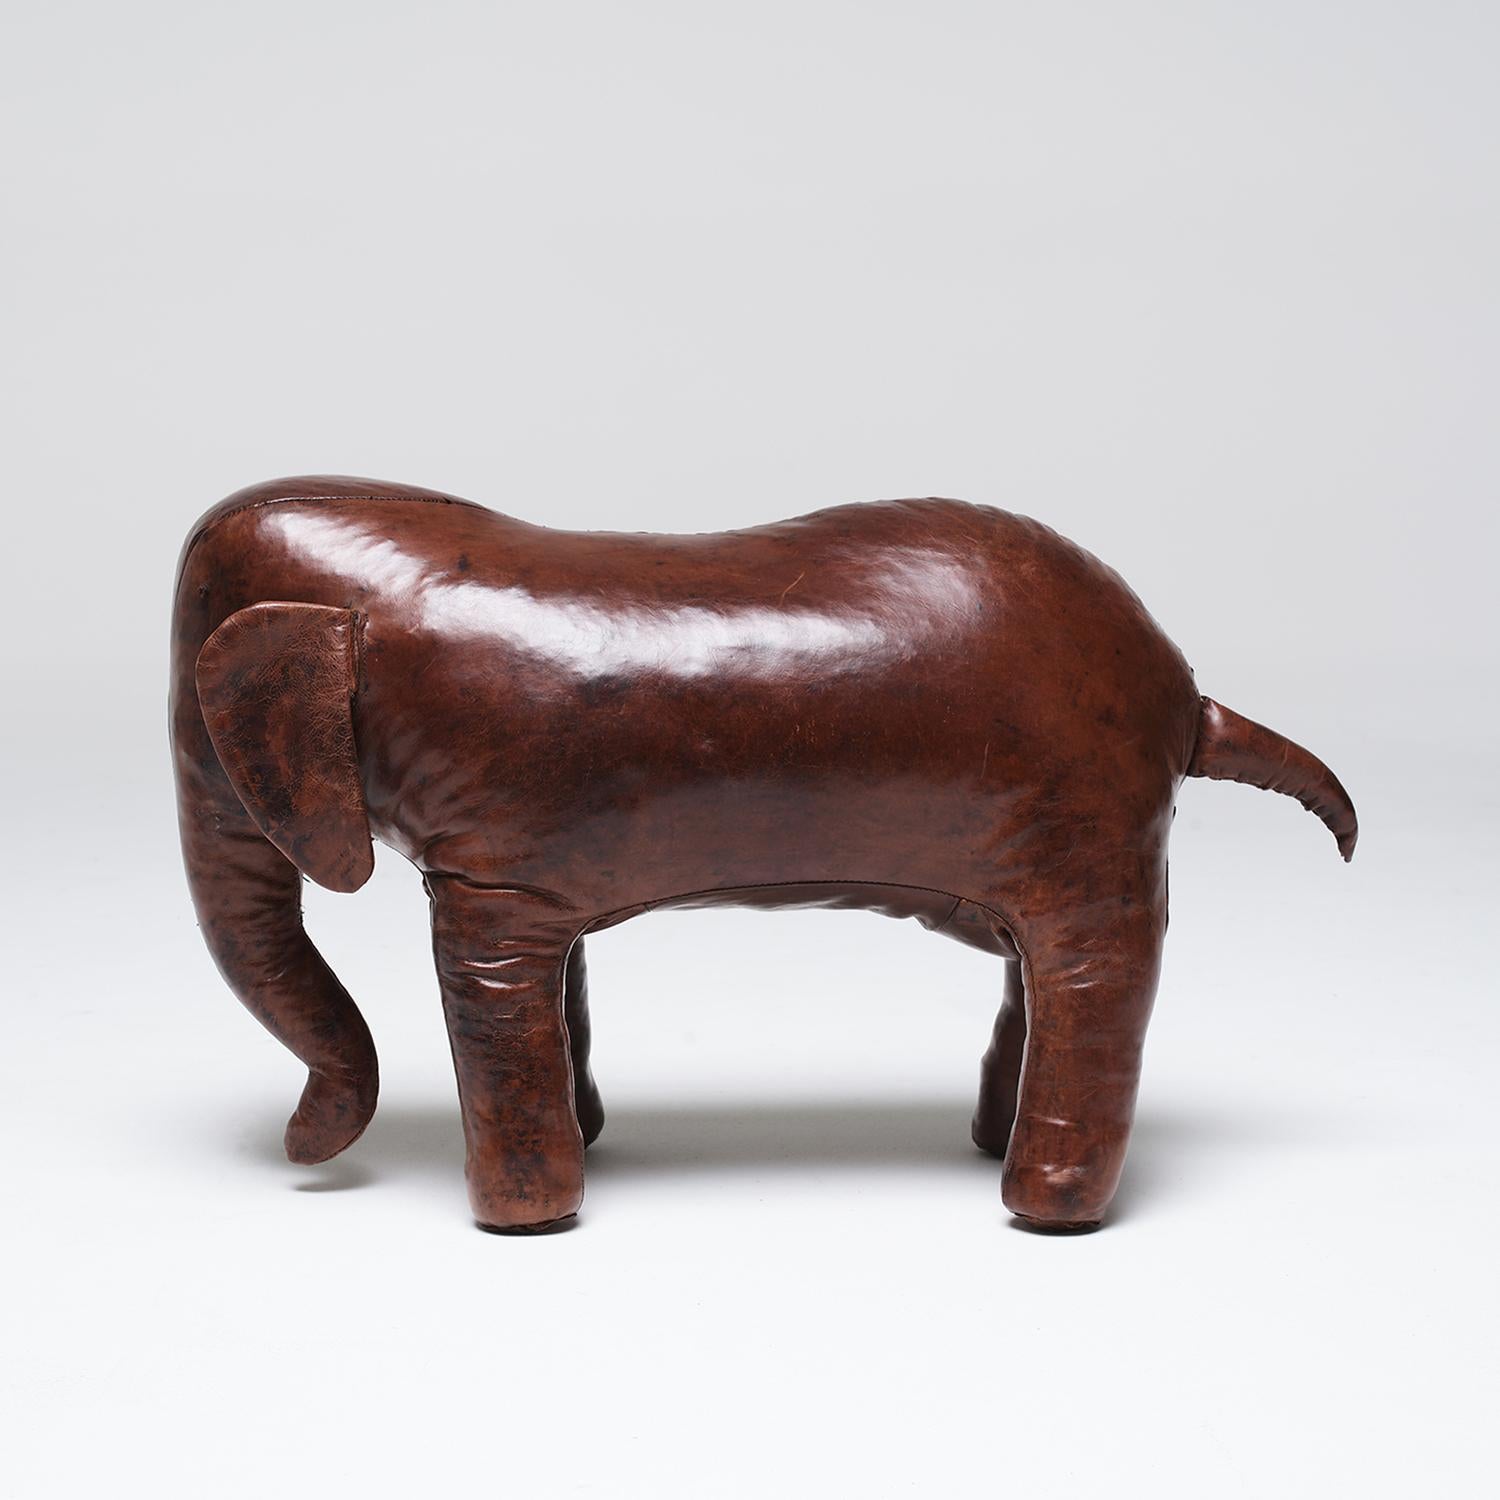 20th Century English Vintage Elephant Footstool in Leather by Dimitri Omersa In Good Condition For Sale In West Palm Beach, FL